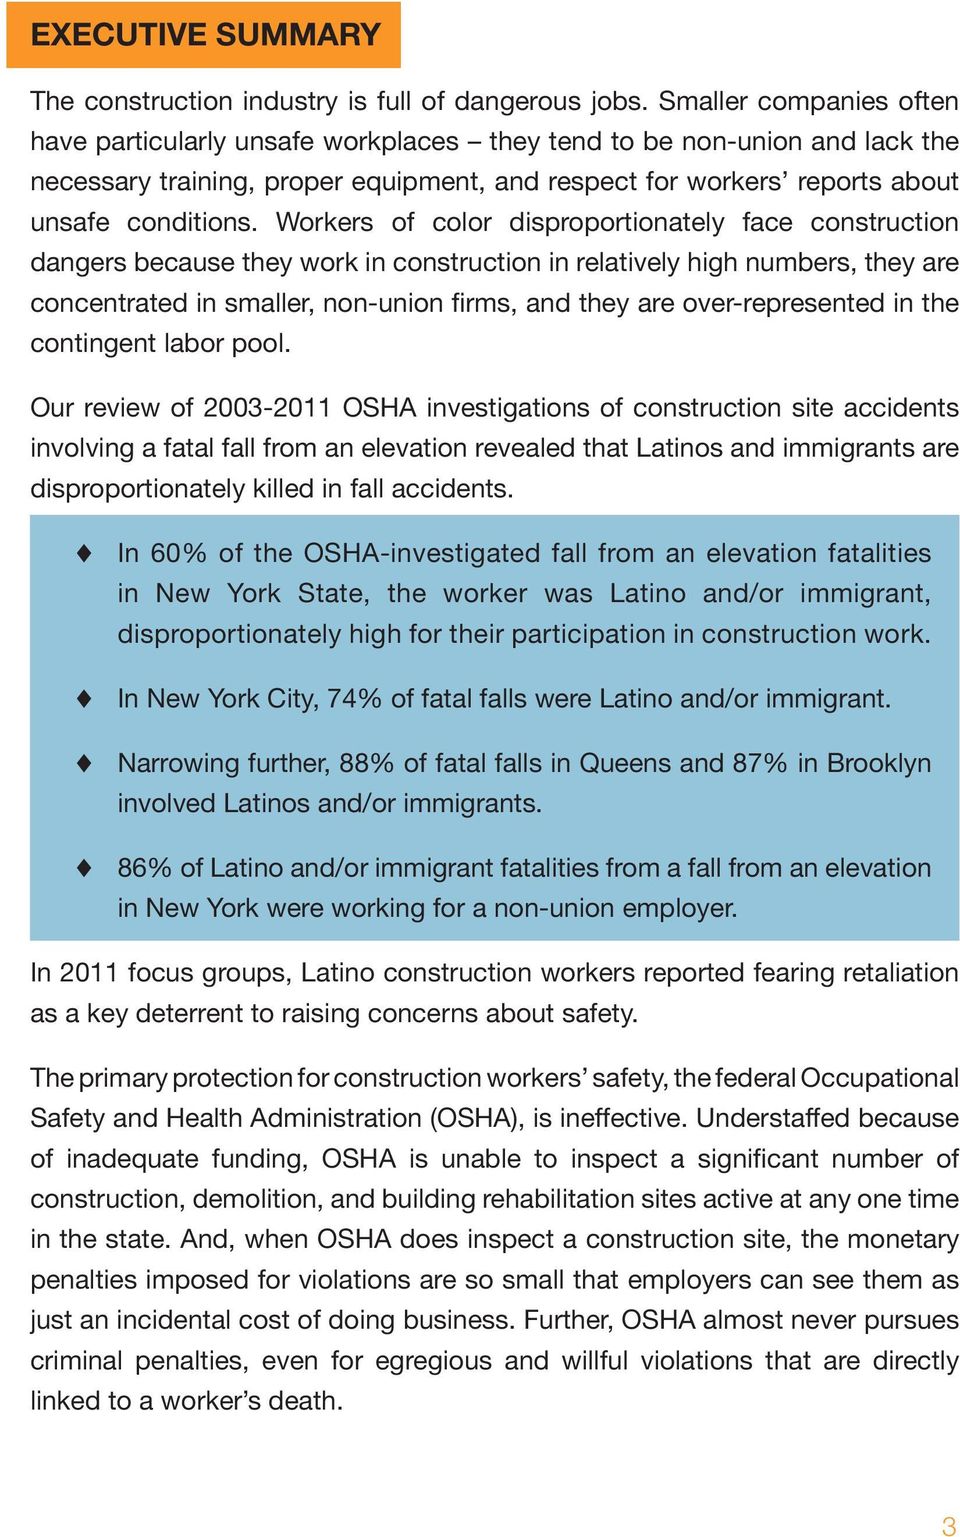 Workers of color disproportionately face construction dangers because they work in construction in relatively high numbers, they are concentrated in smaller, non-union firms, and they are